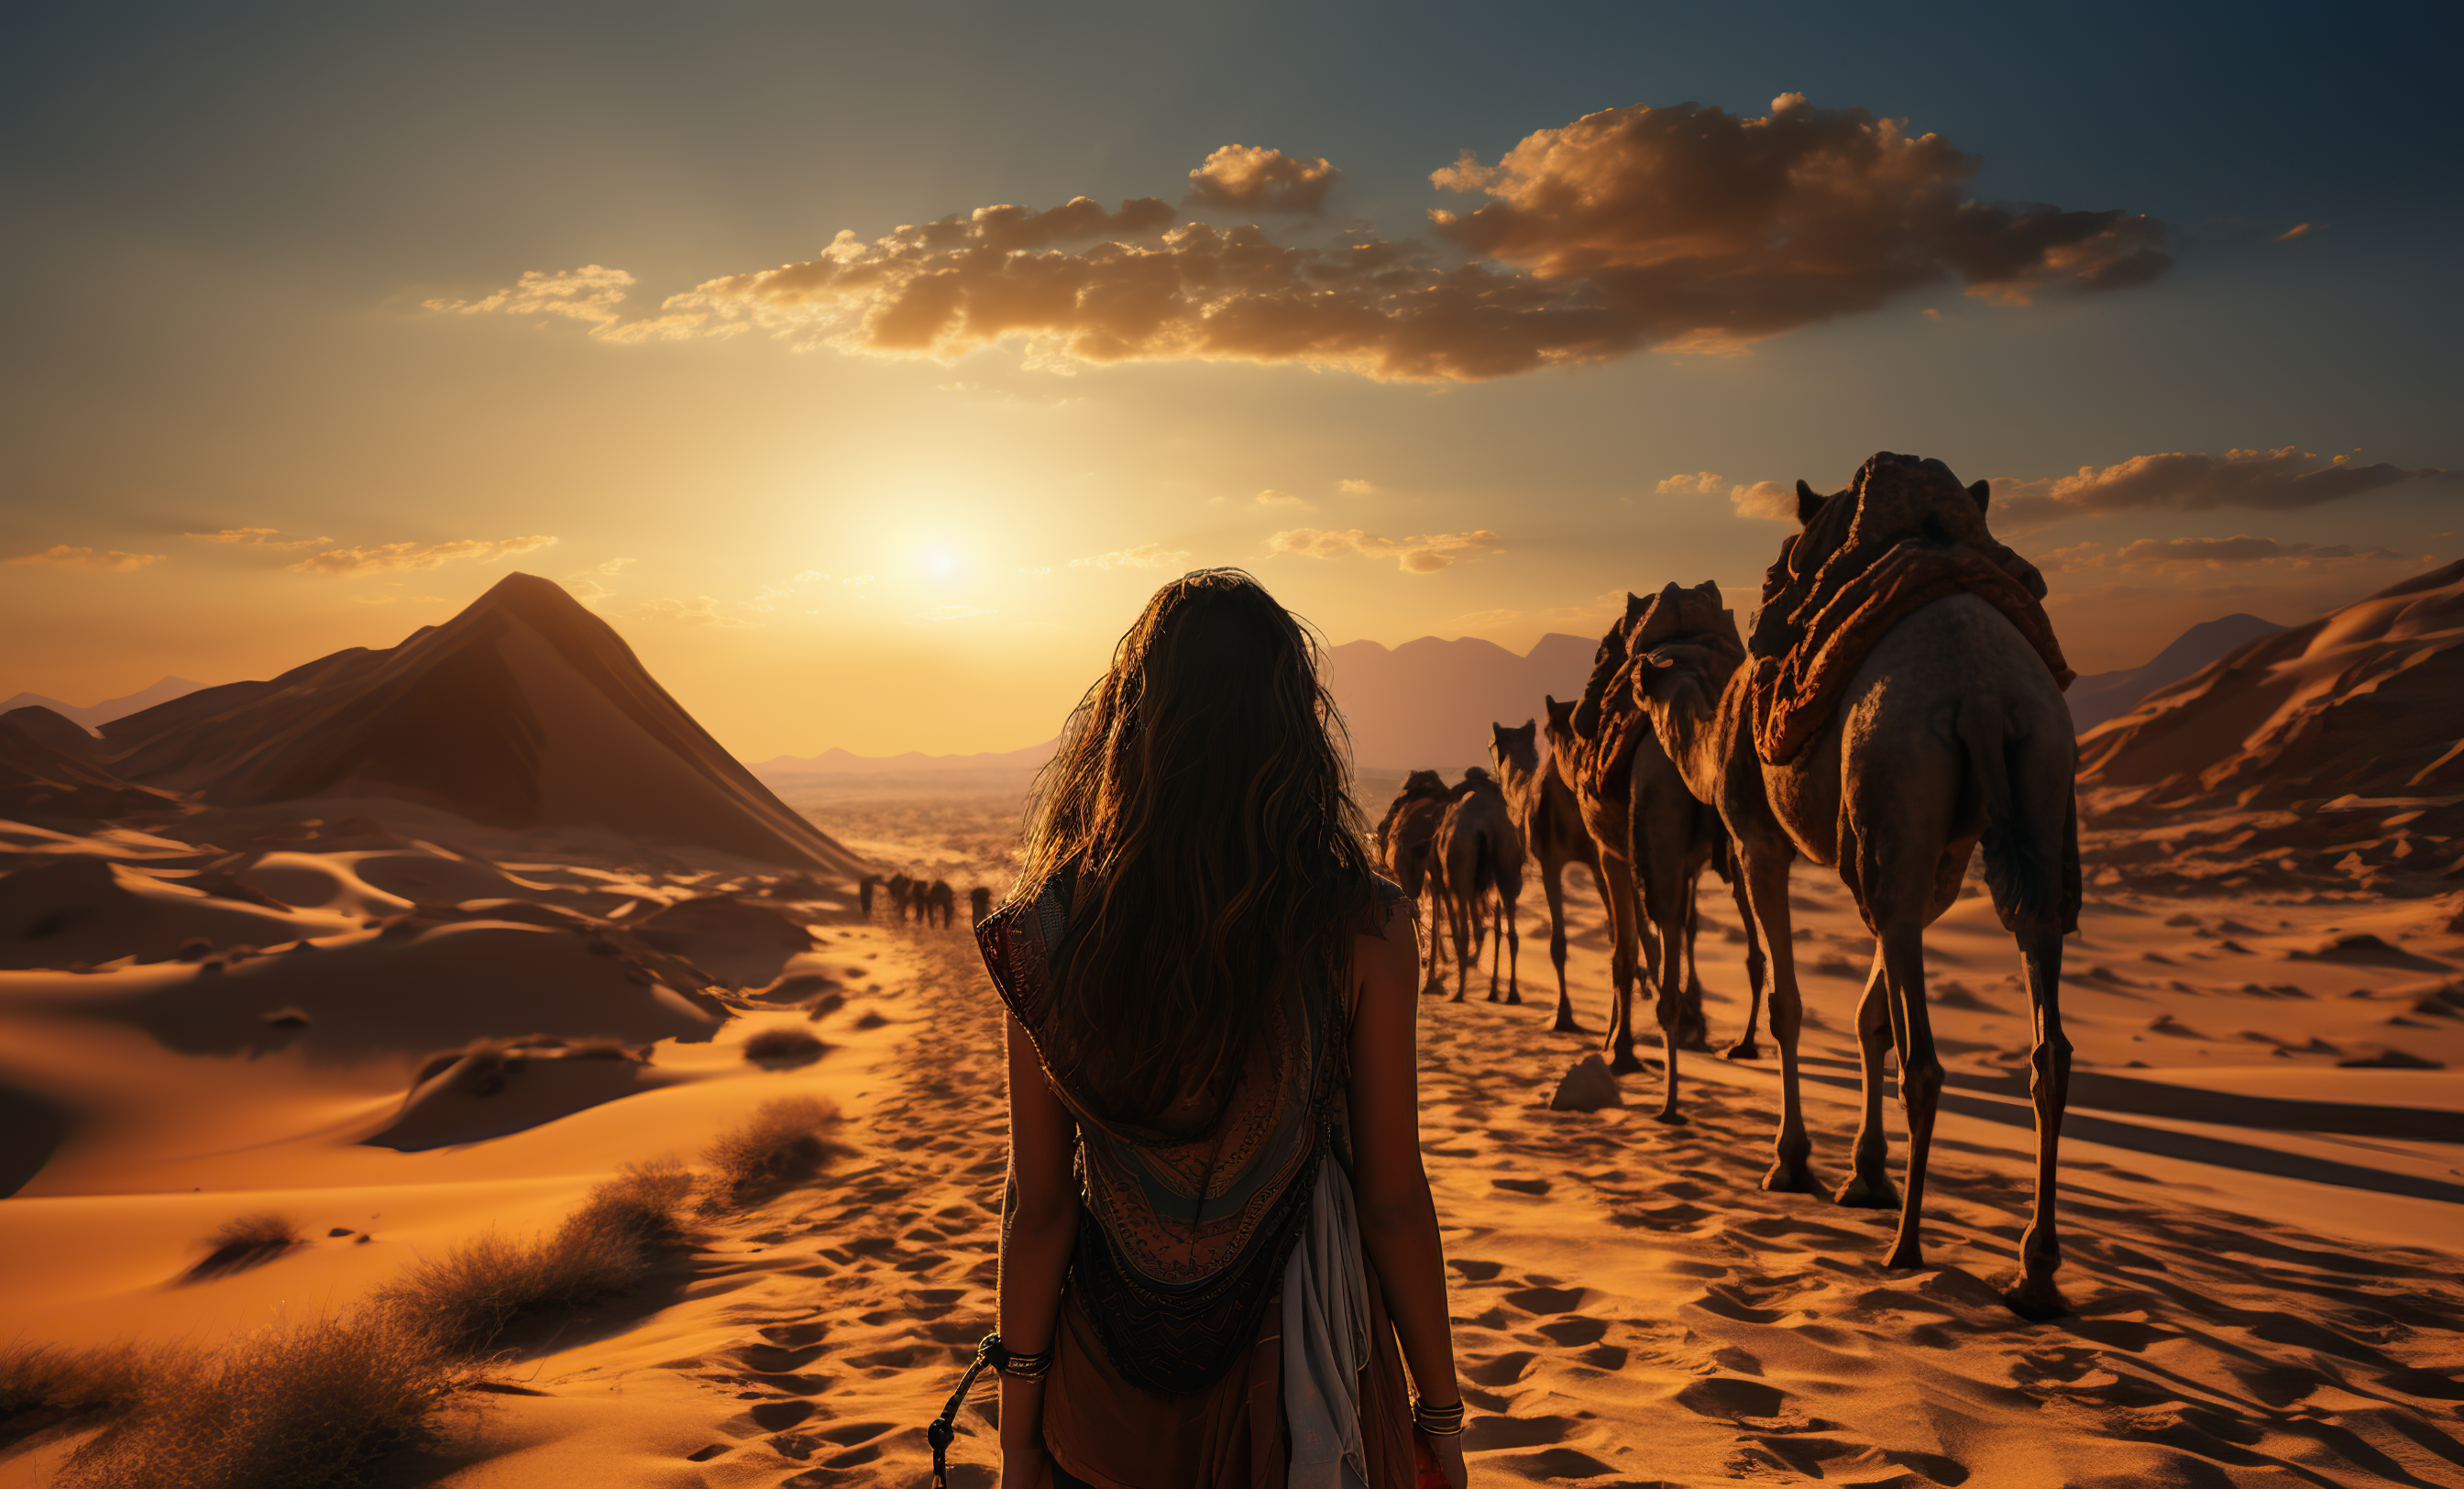 Impressive view of a girl looking to camels with colorful intricate saddle back